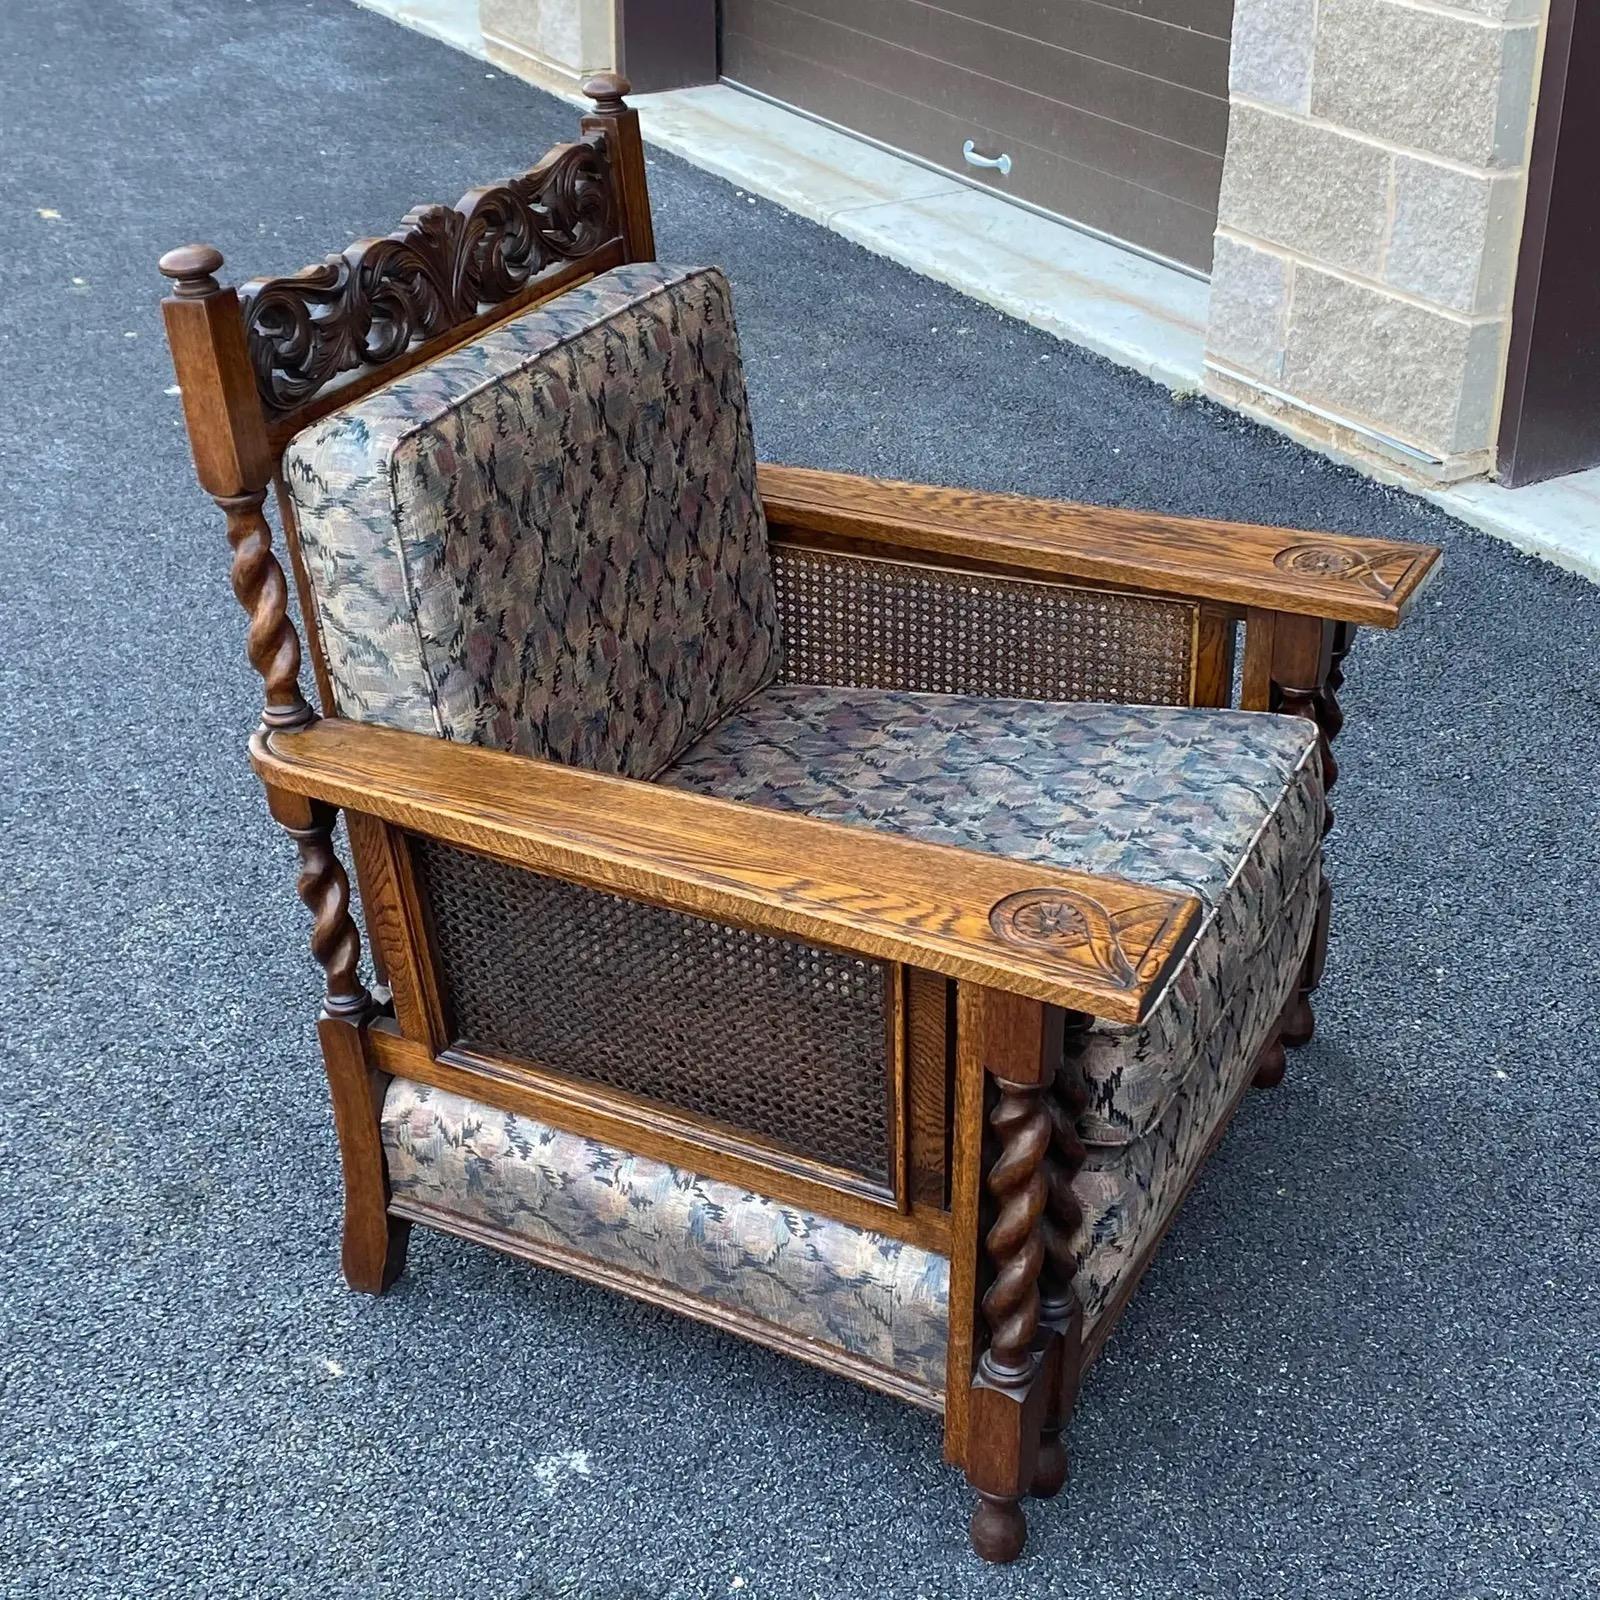 20th Century Antique Carved English Oak Barley Twist Lounge Chair With Caned Back & Sides For Sale